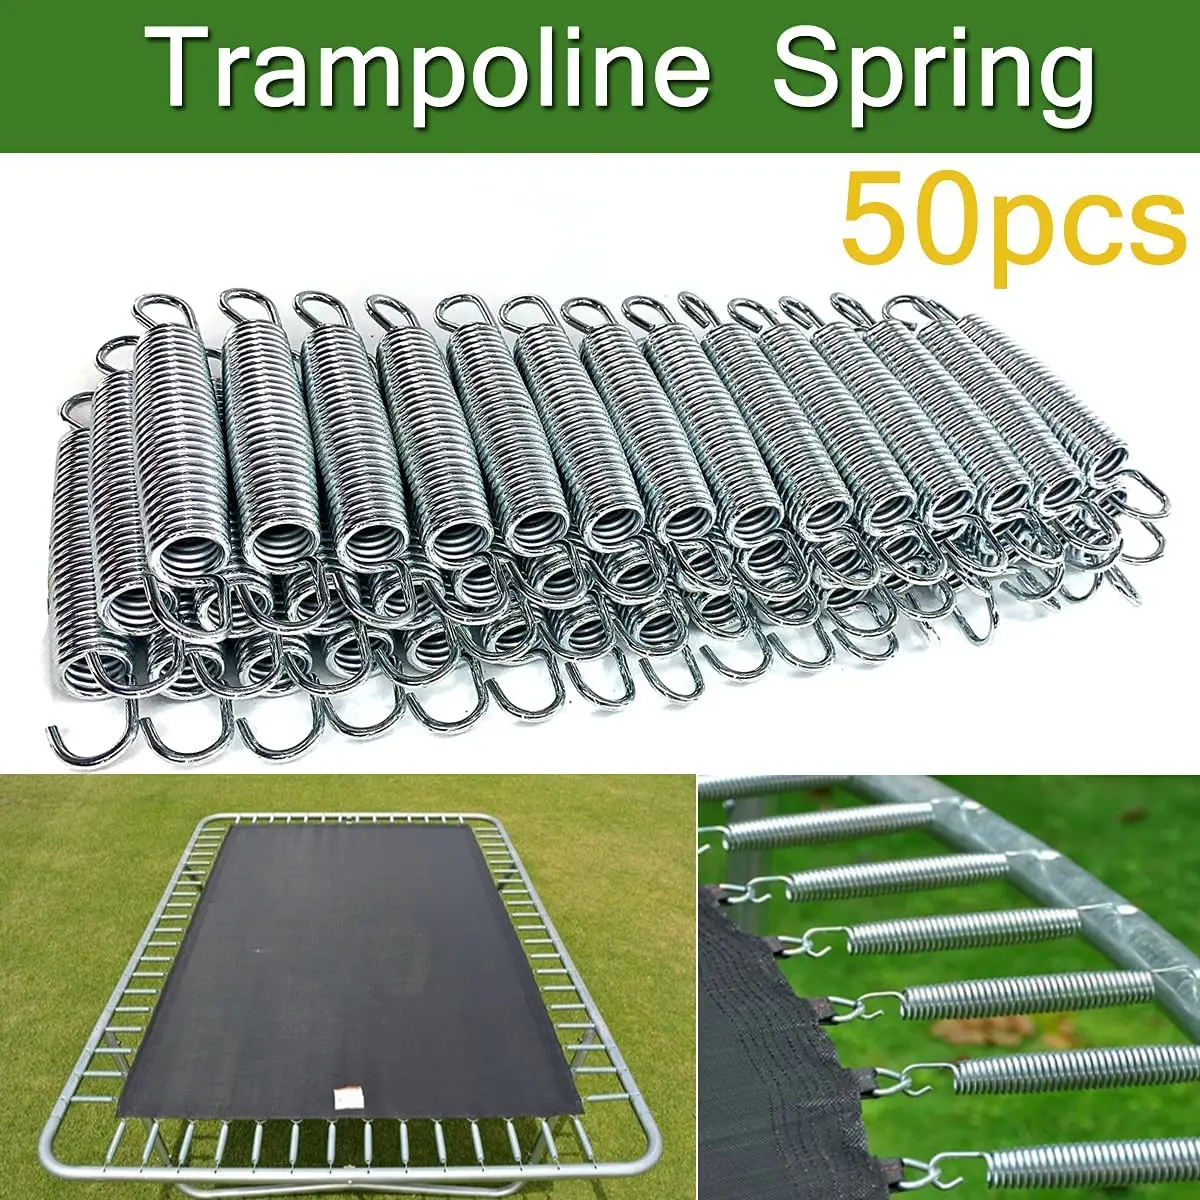 5.5" Trampoline Springs Galvanized Steel Replacement Durable High Tensile 50PCS 